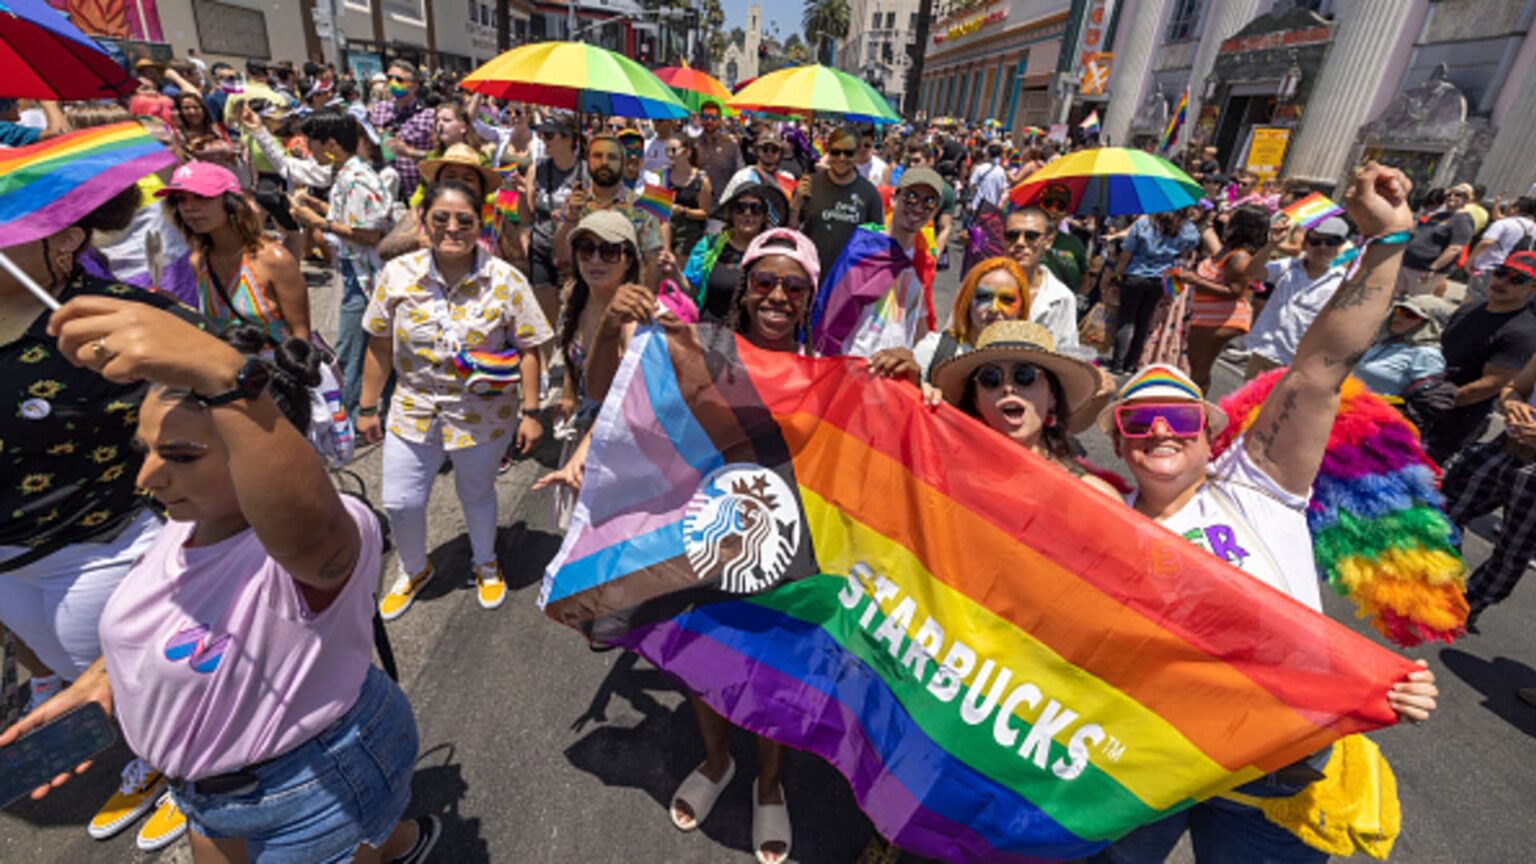 Starbucks union says workers will strike over Pride decoration